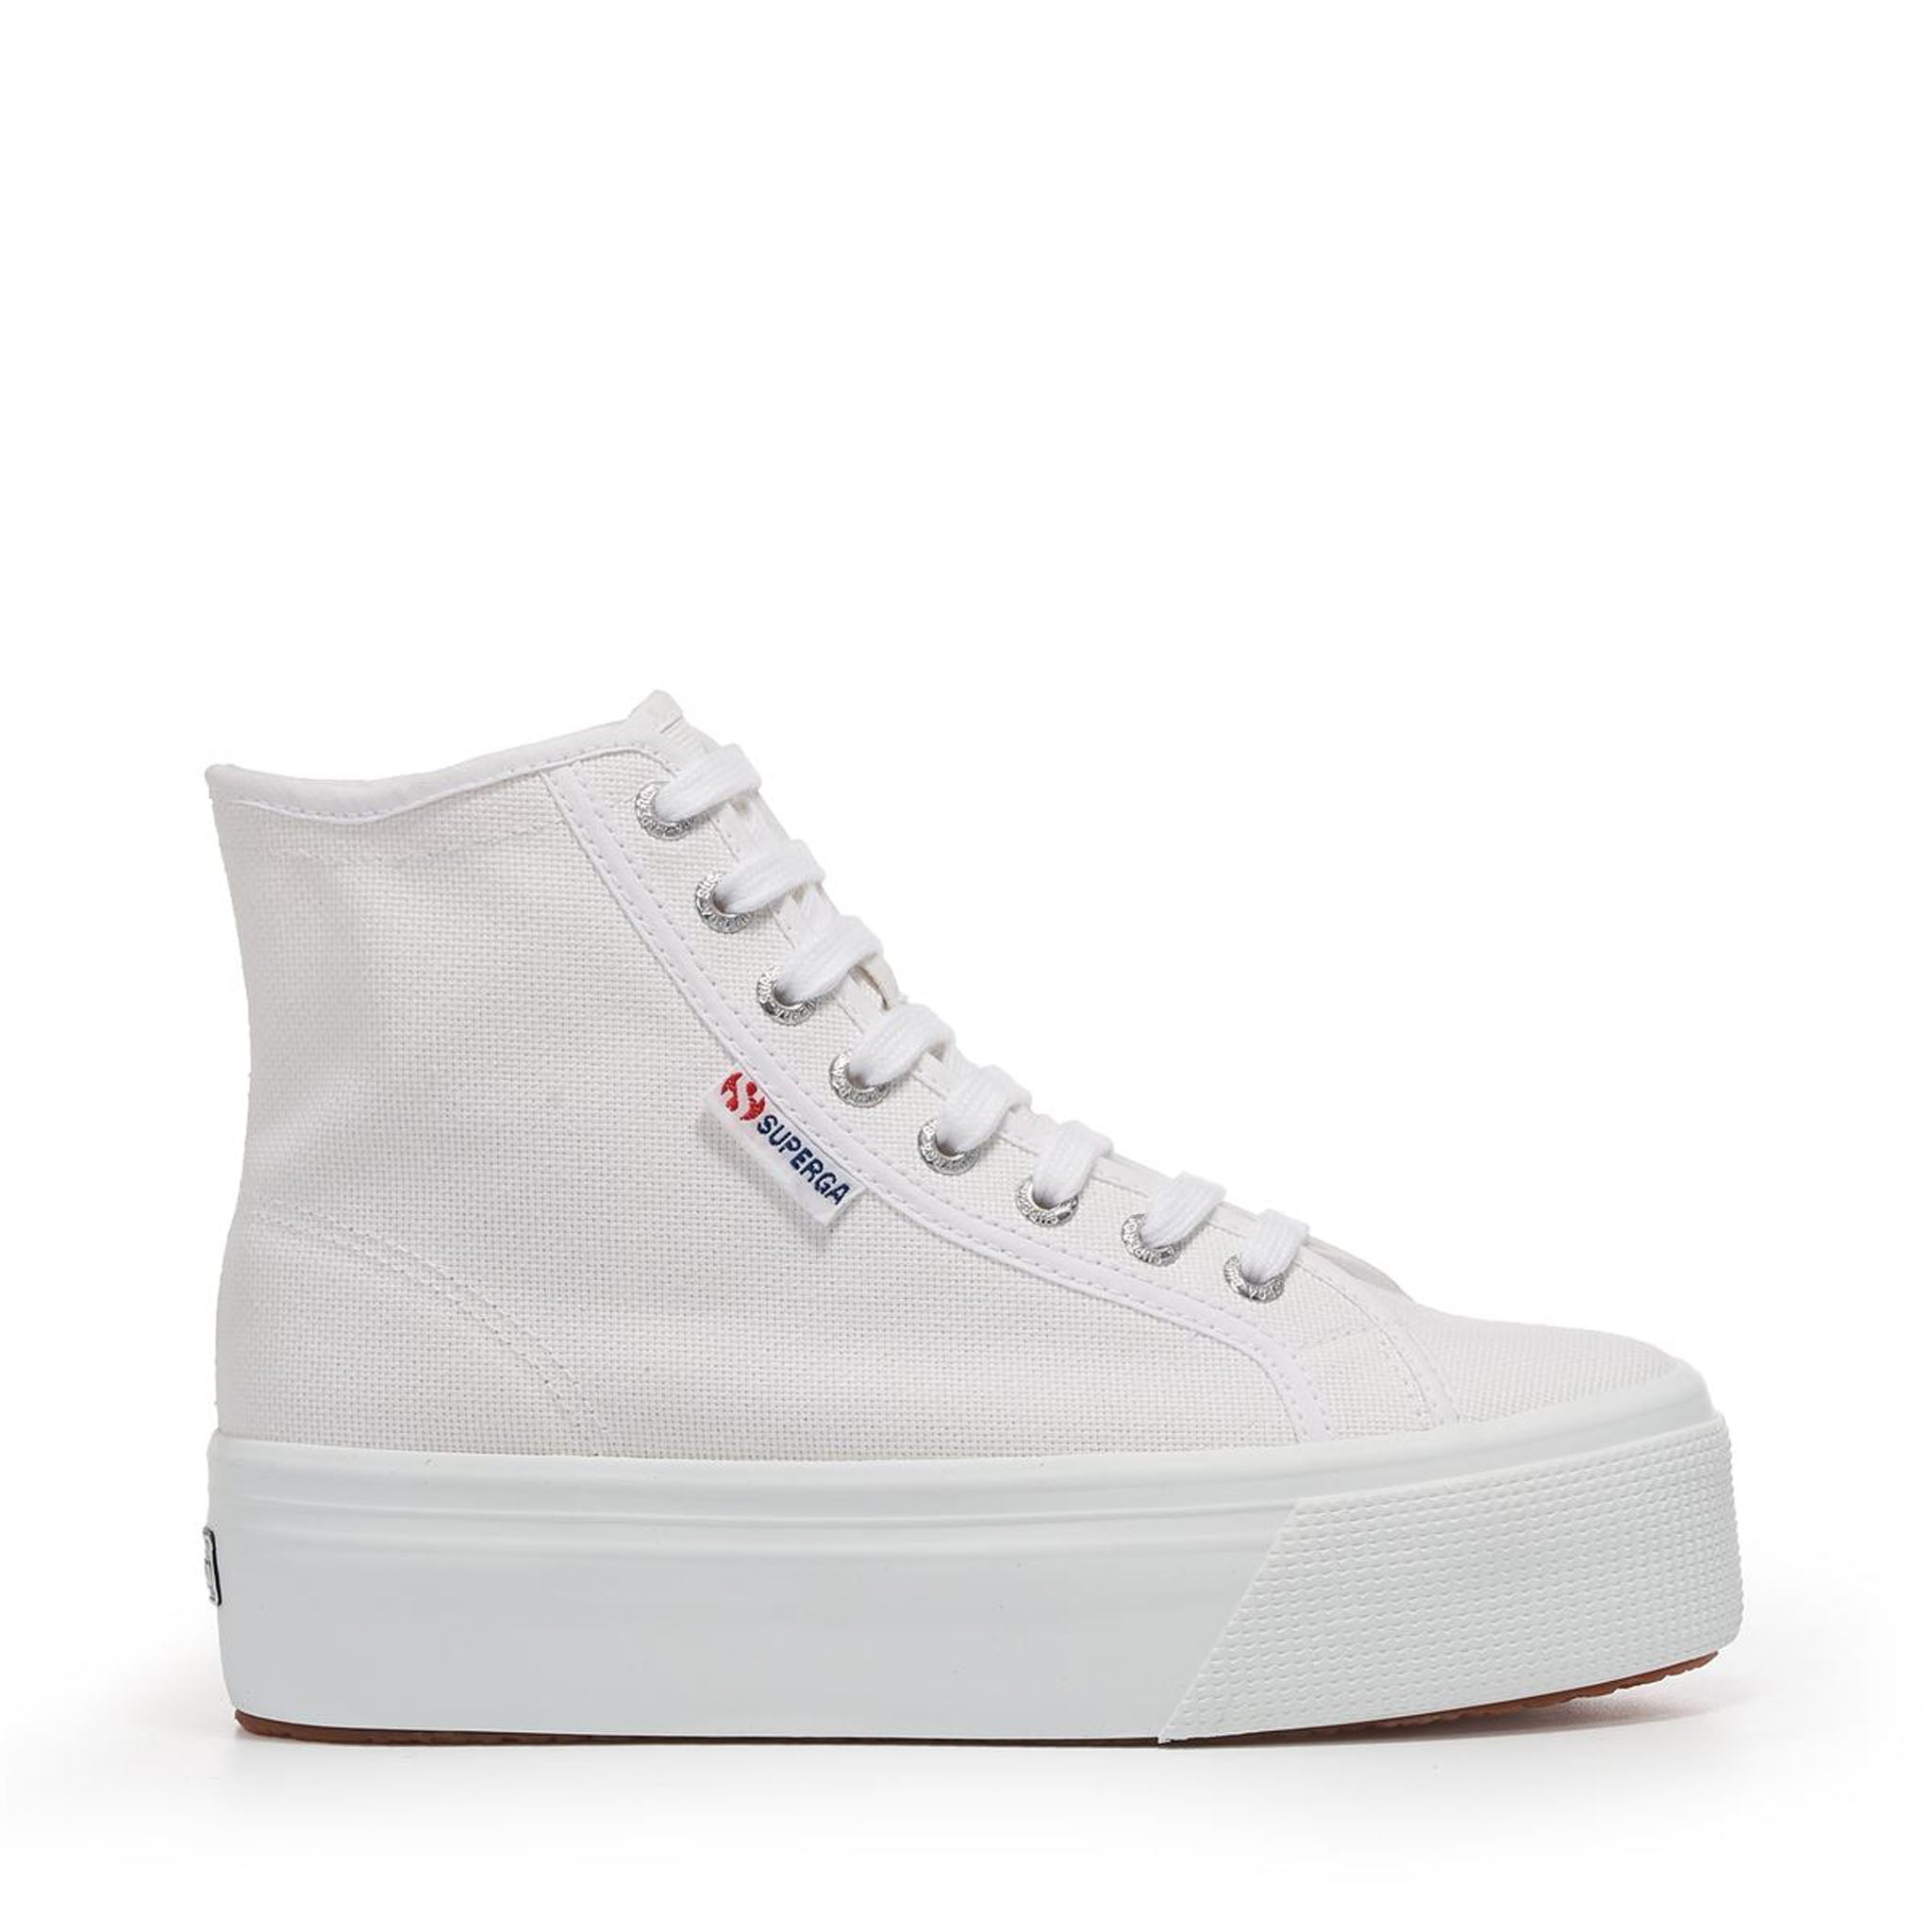 Superga 2708 High Top Sneakers - White. Side view.